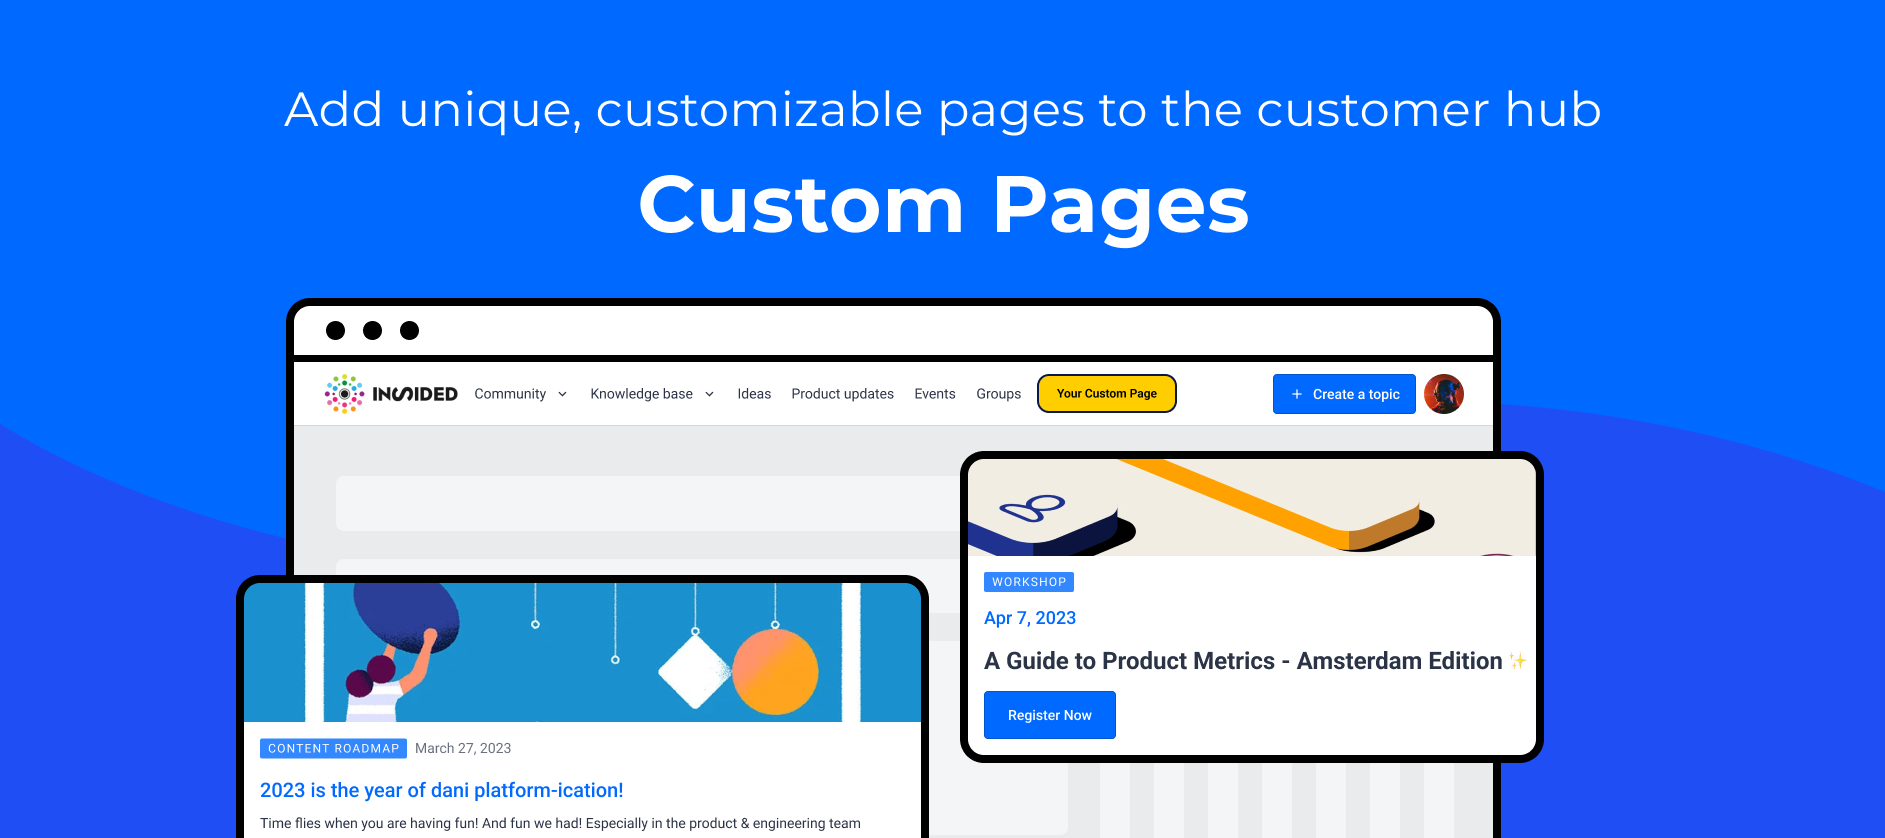 Getting Started with Custom Pages